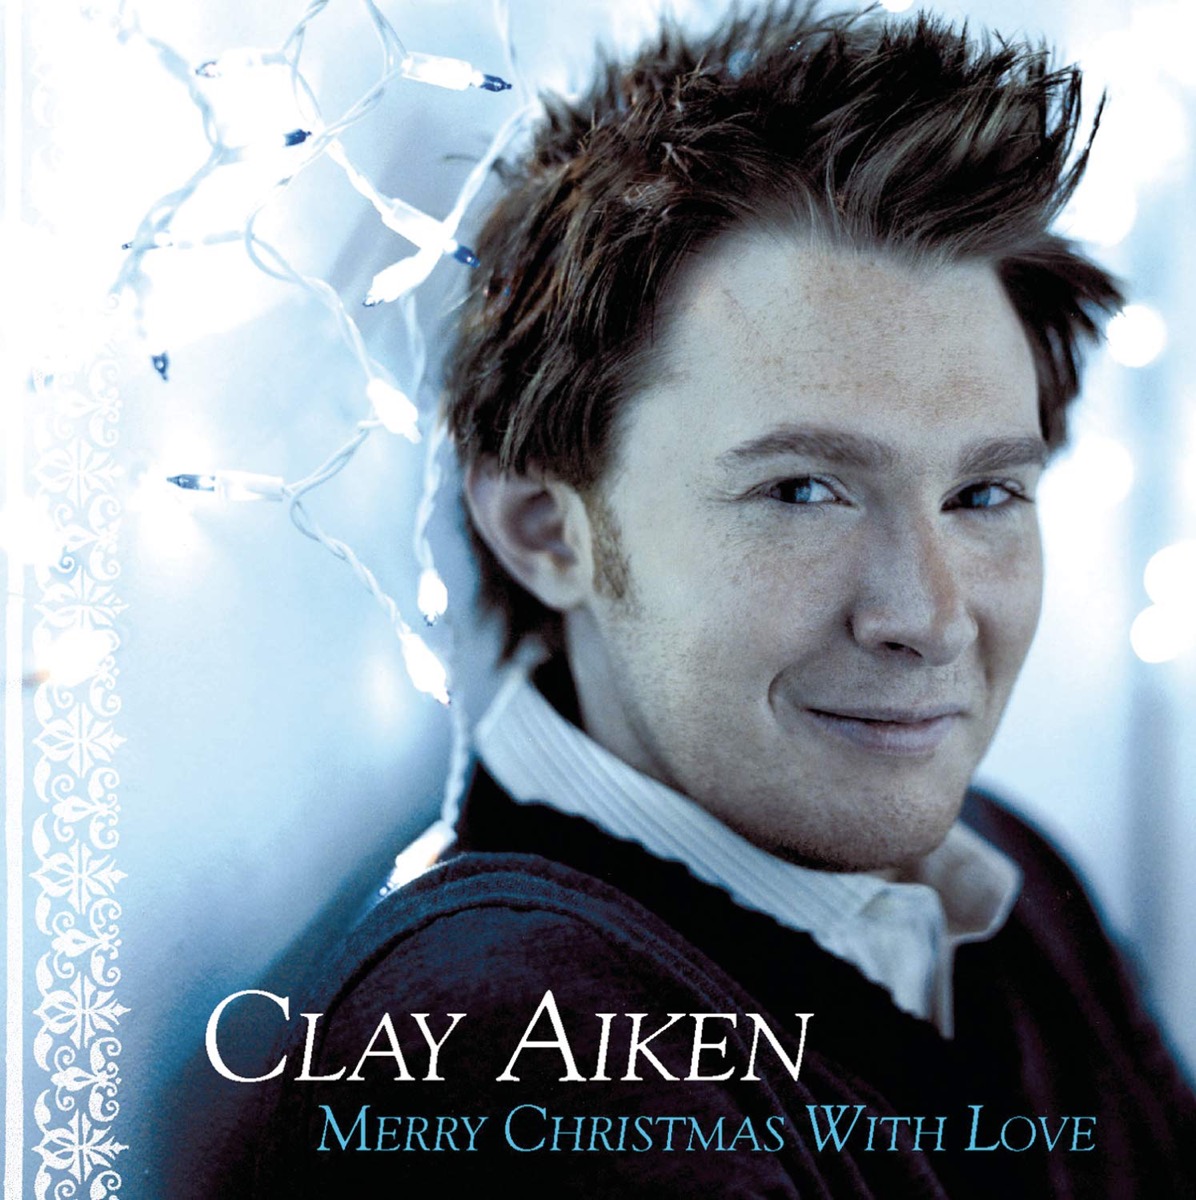 merry christmas with love album cover